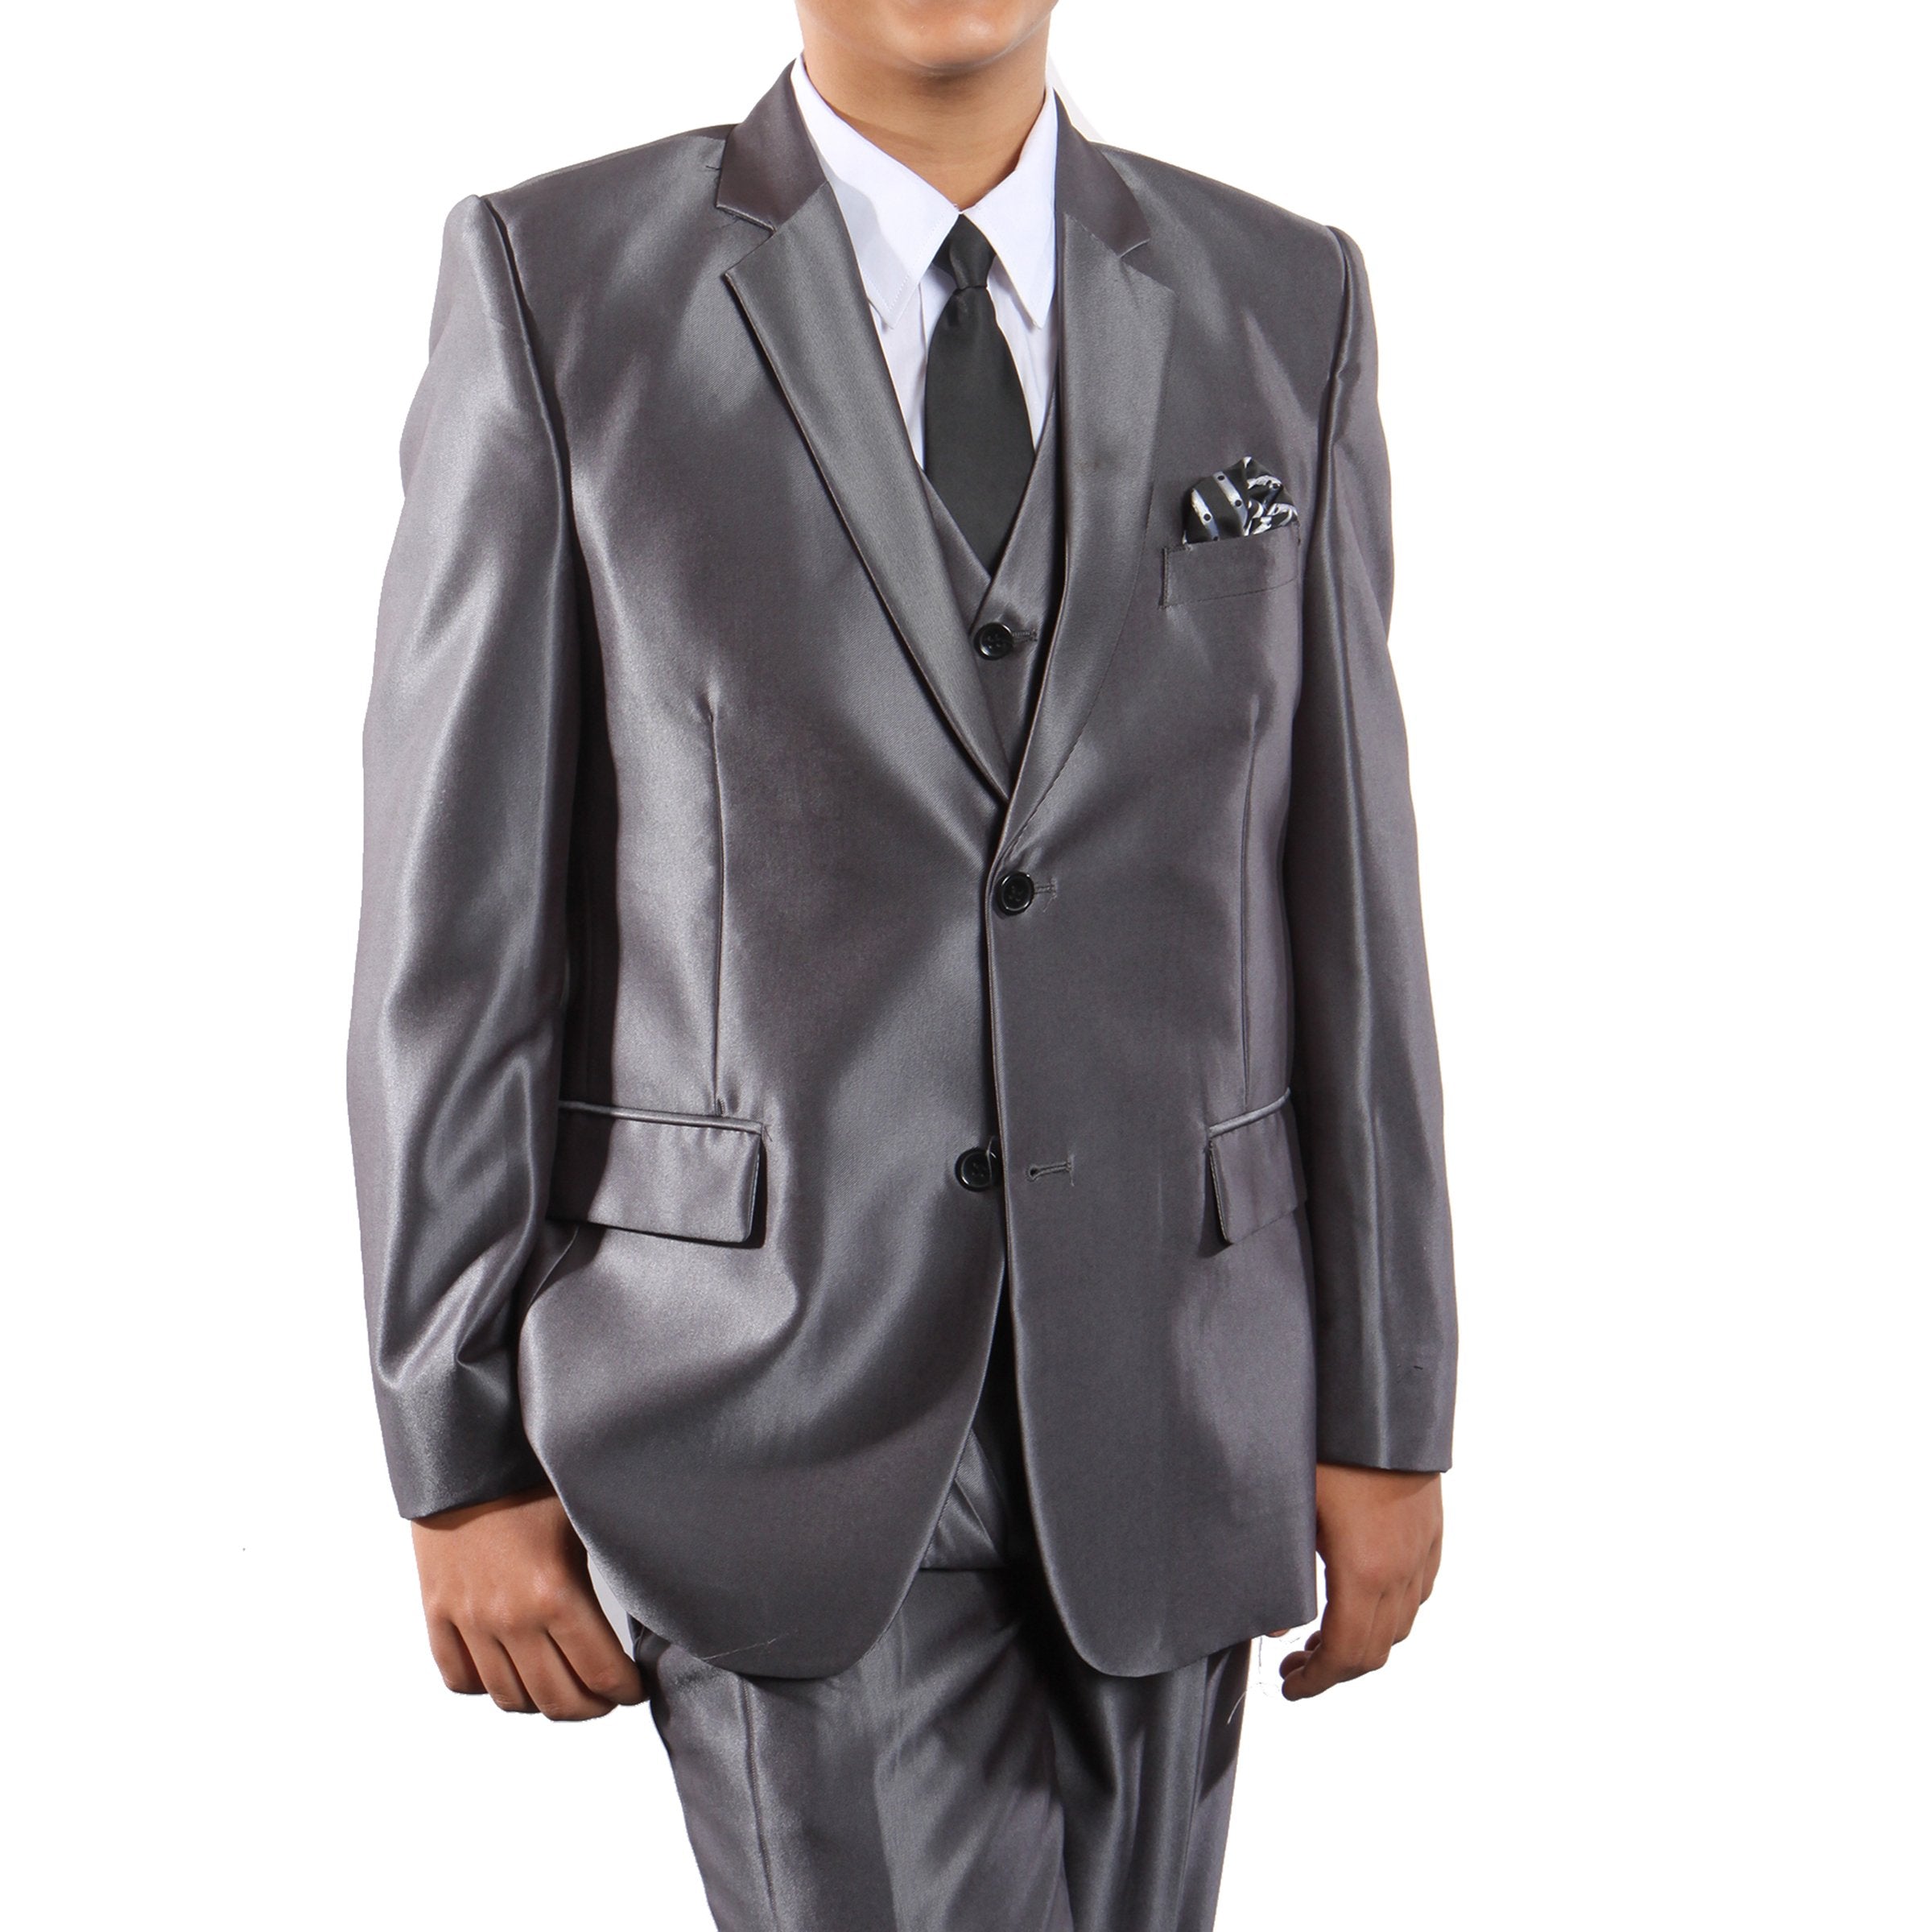 Sharkskin Boys Suit With Free Matching Shirt & Tie Suits For Boy's